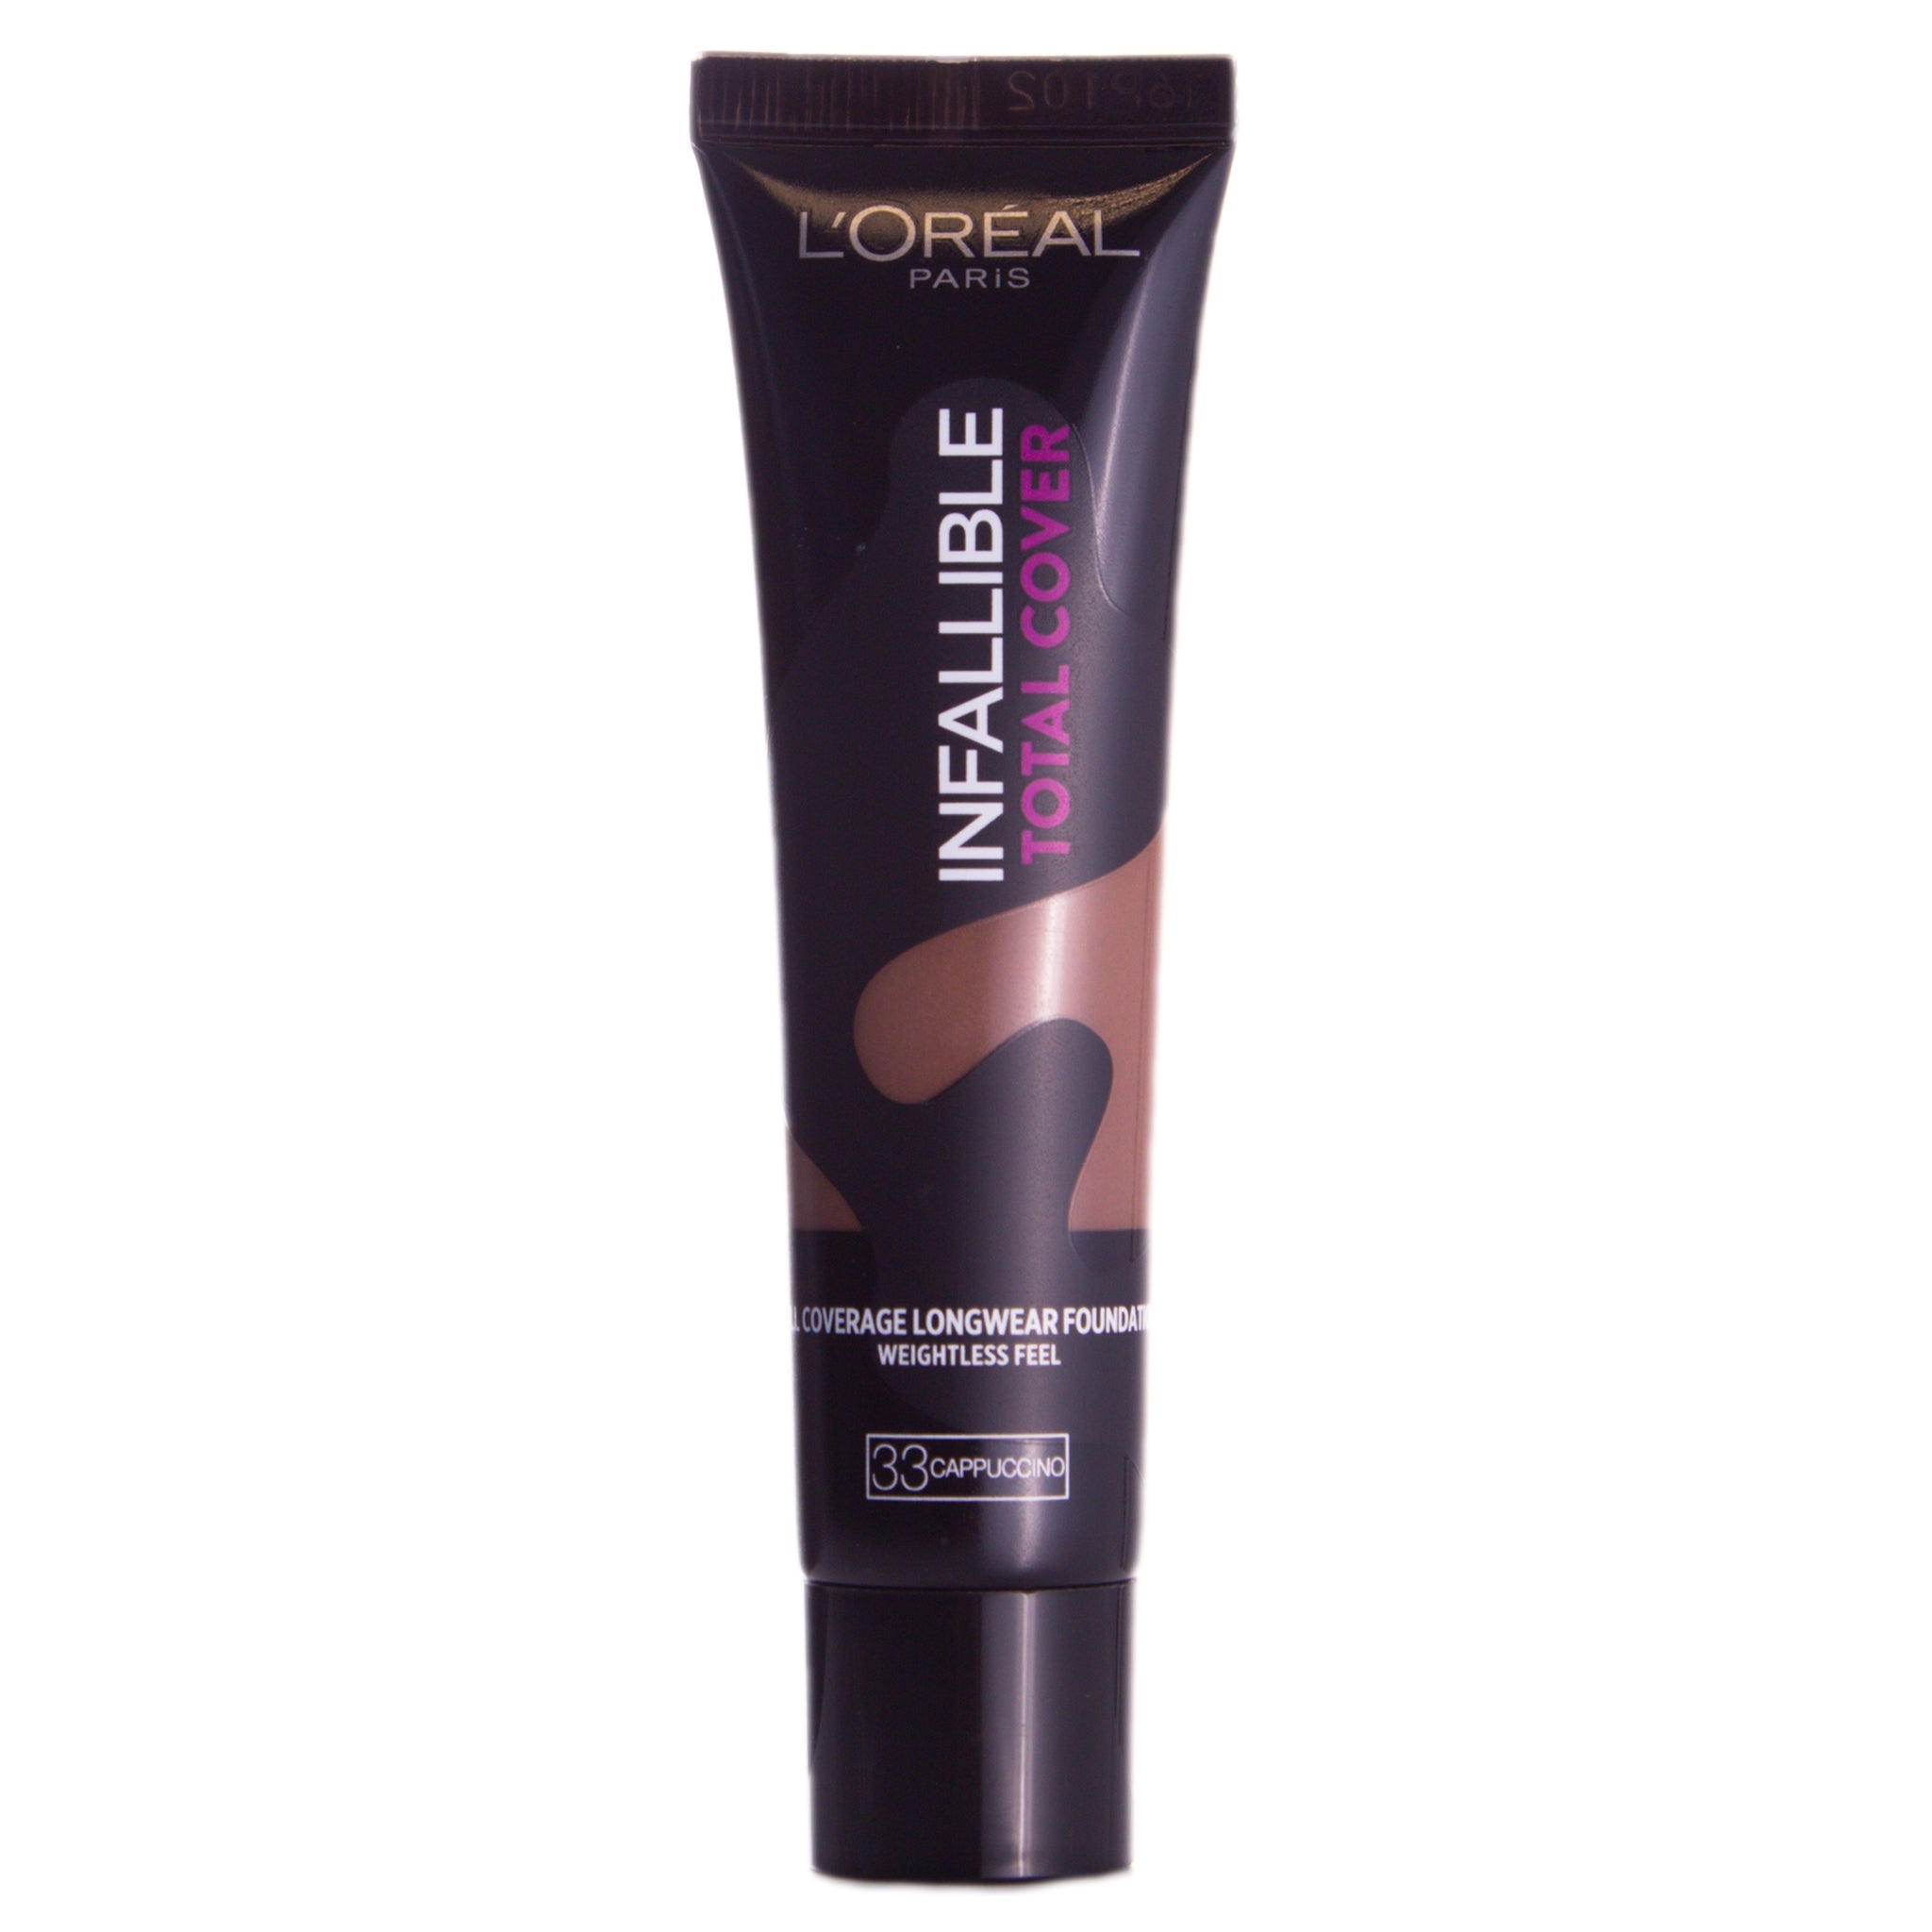 L'Oreal Infallible Total Cover Foundation - 33 Cappuccino